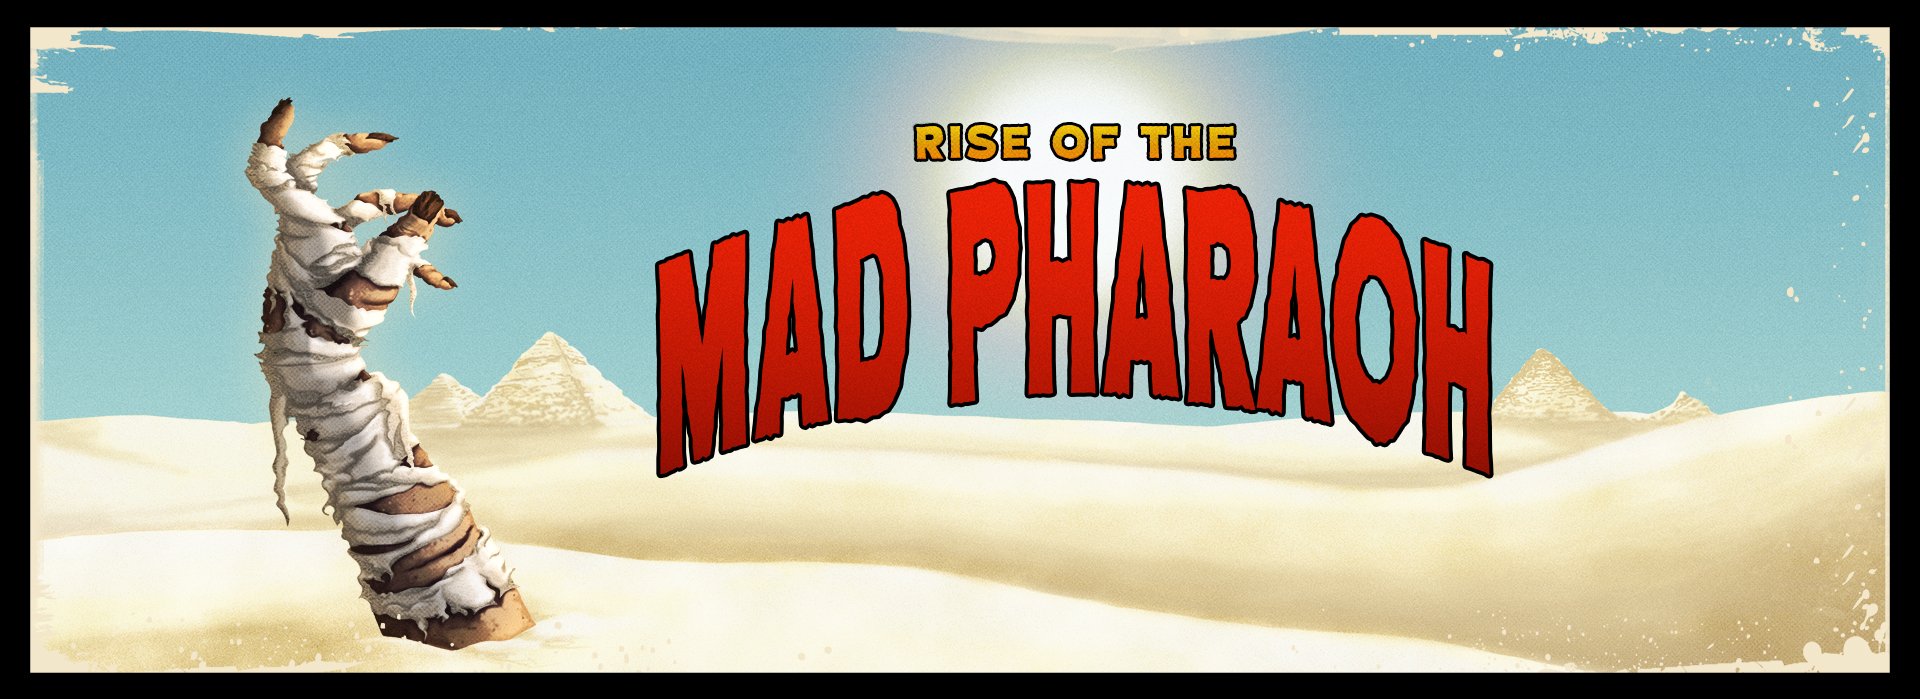 Rise of the Mad Pharao